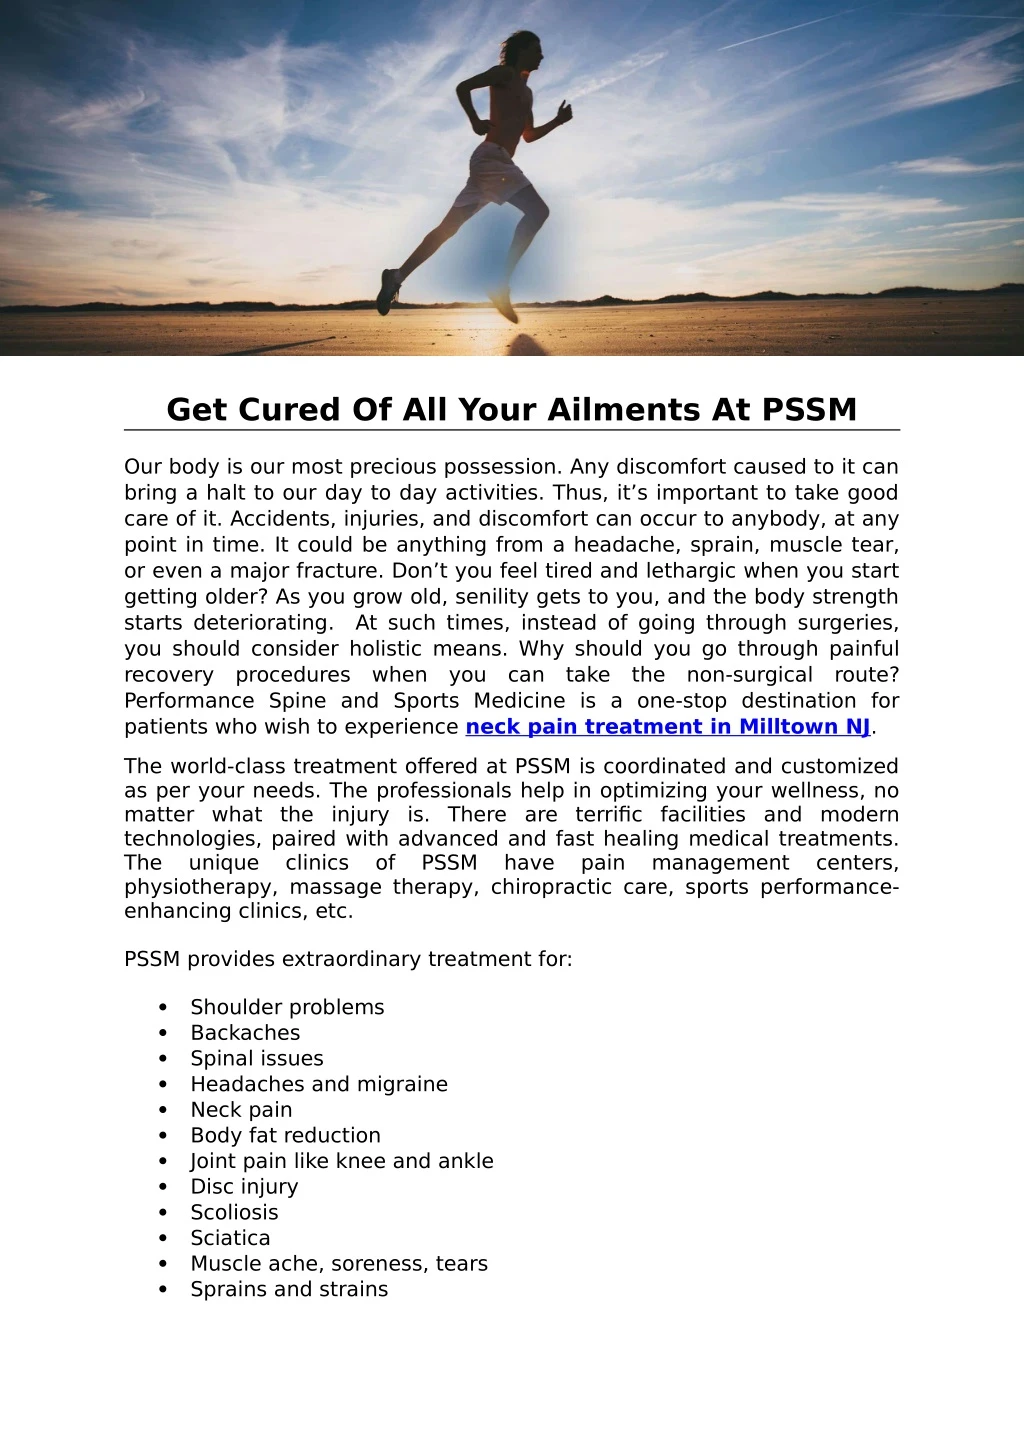 get cured of all your ailments at pssm